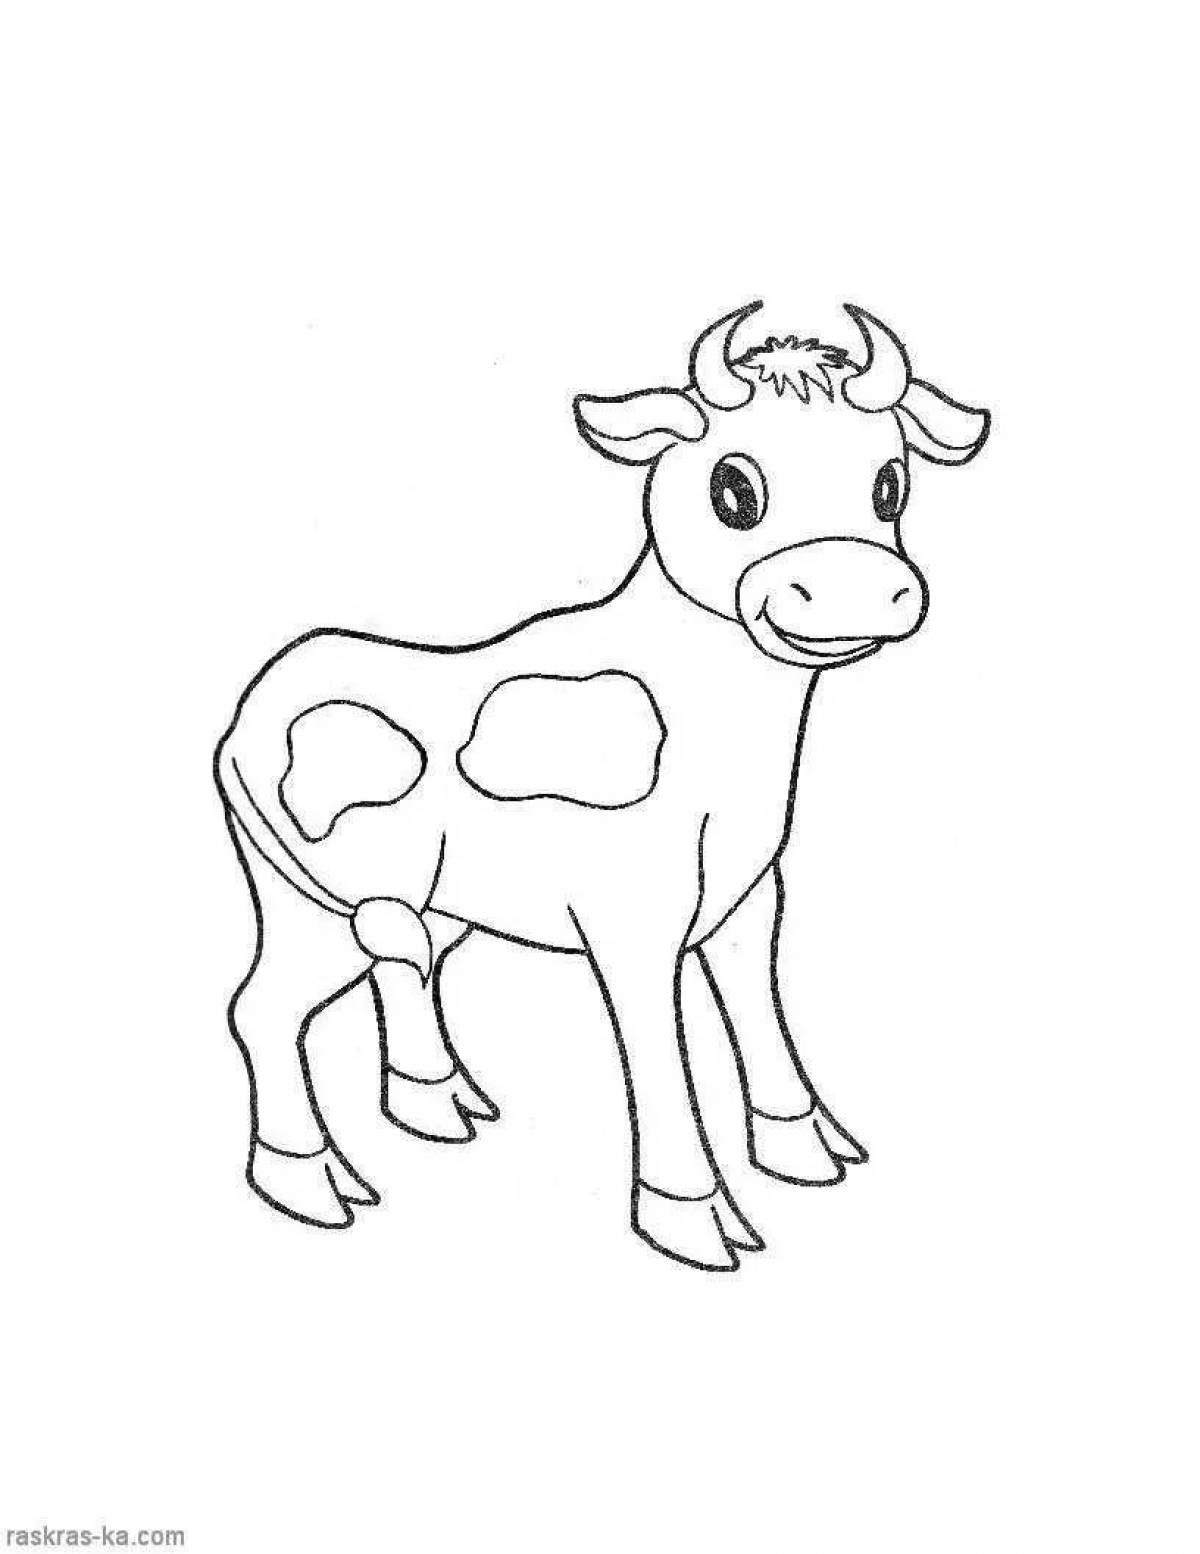 Great bull coloring for kids